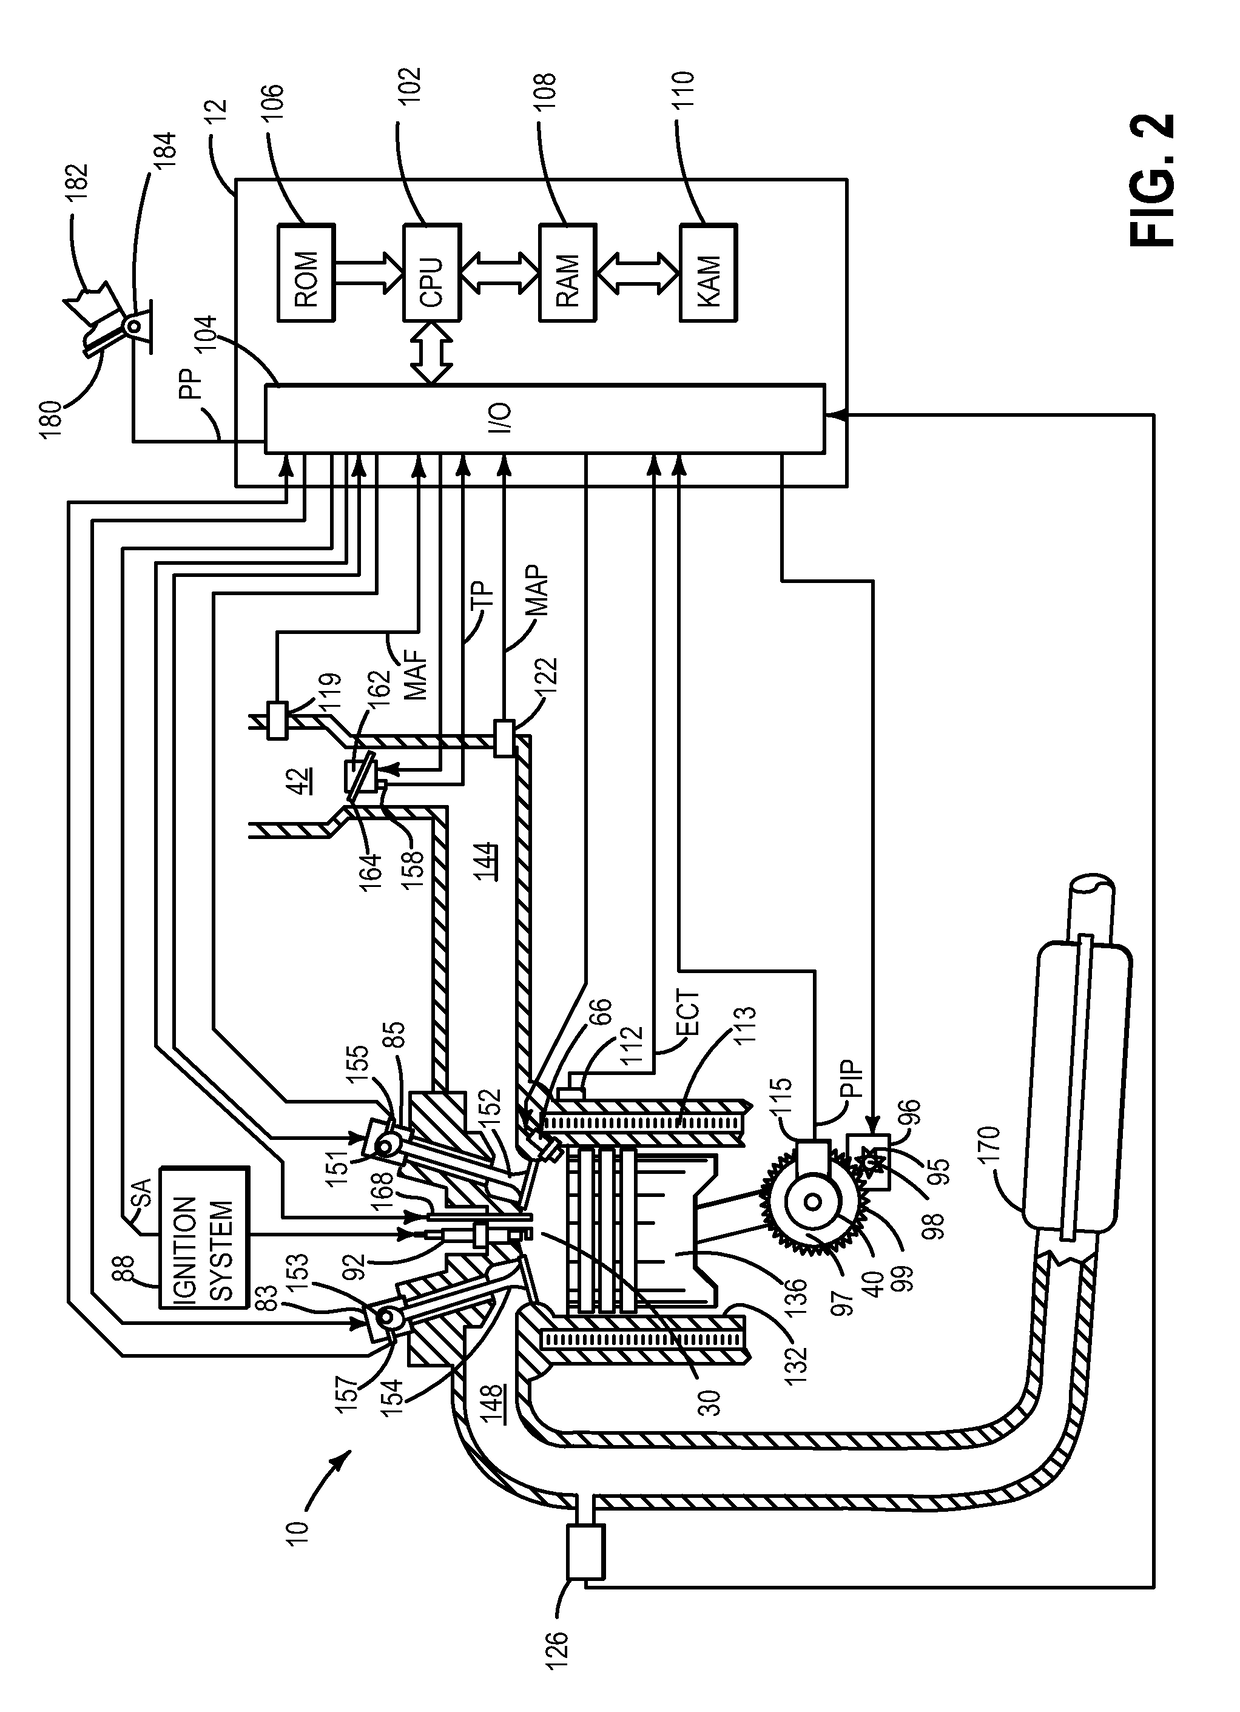 Systems and methods for EGR control